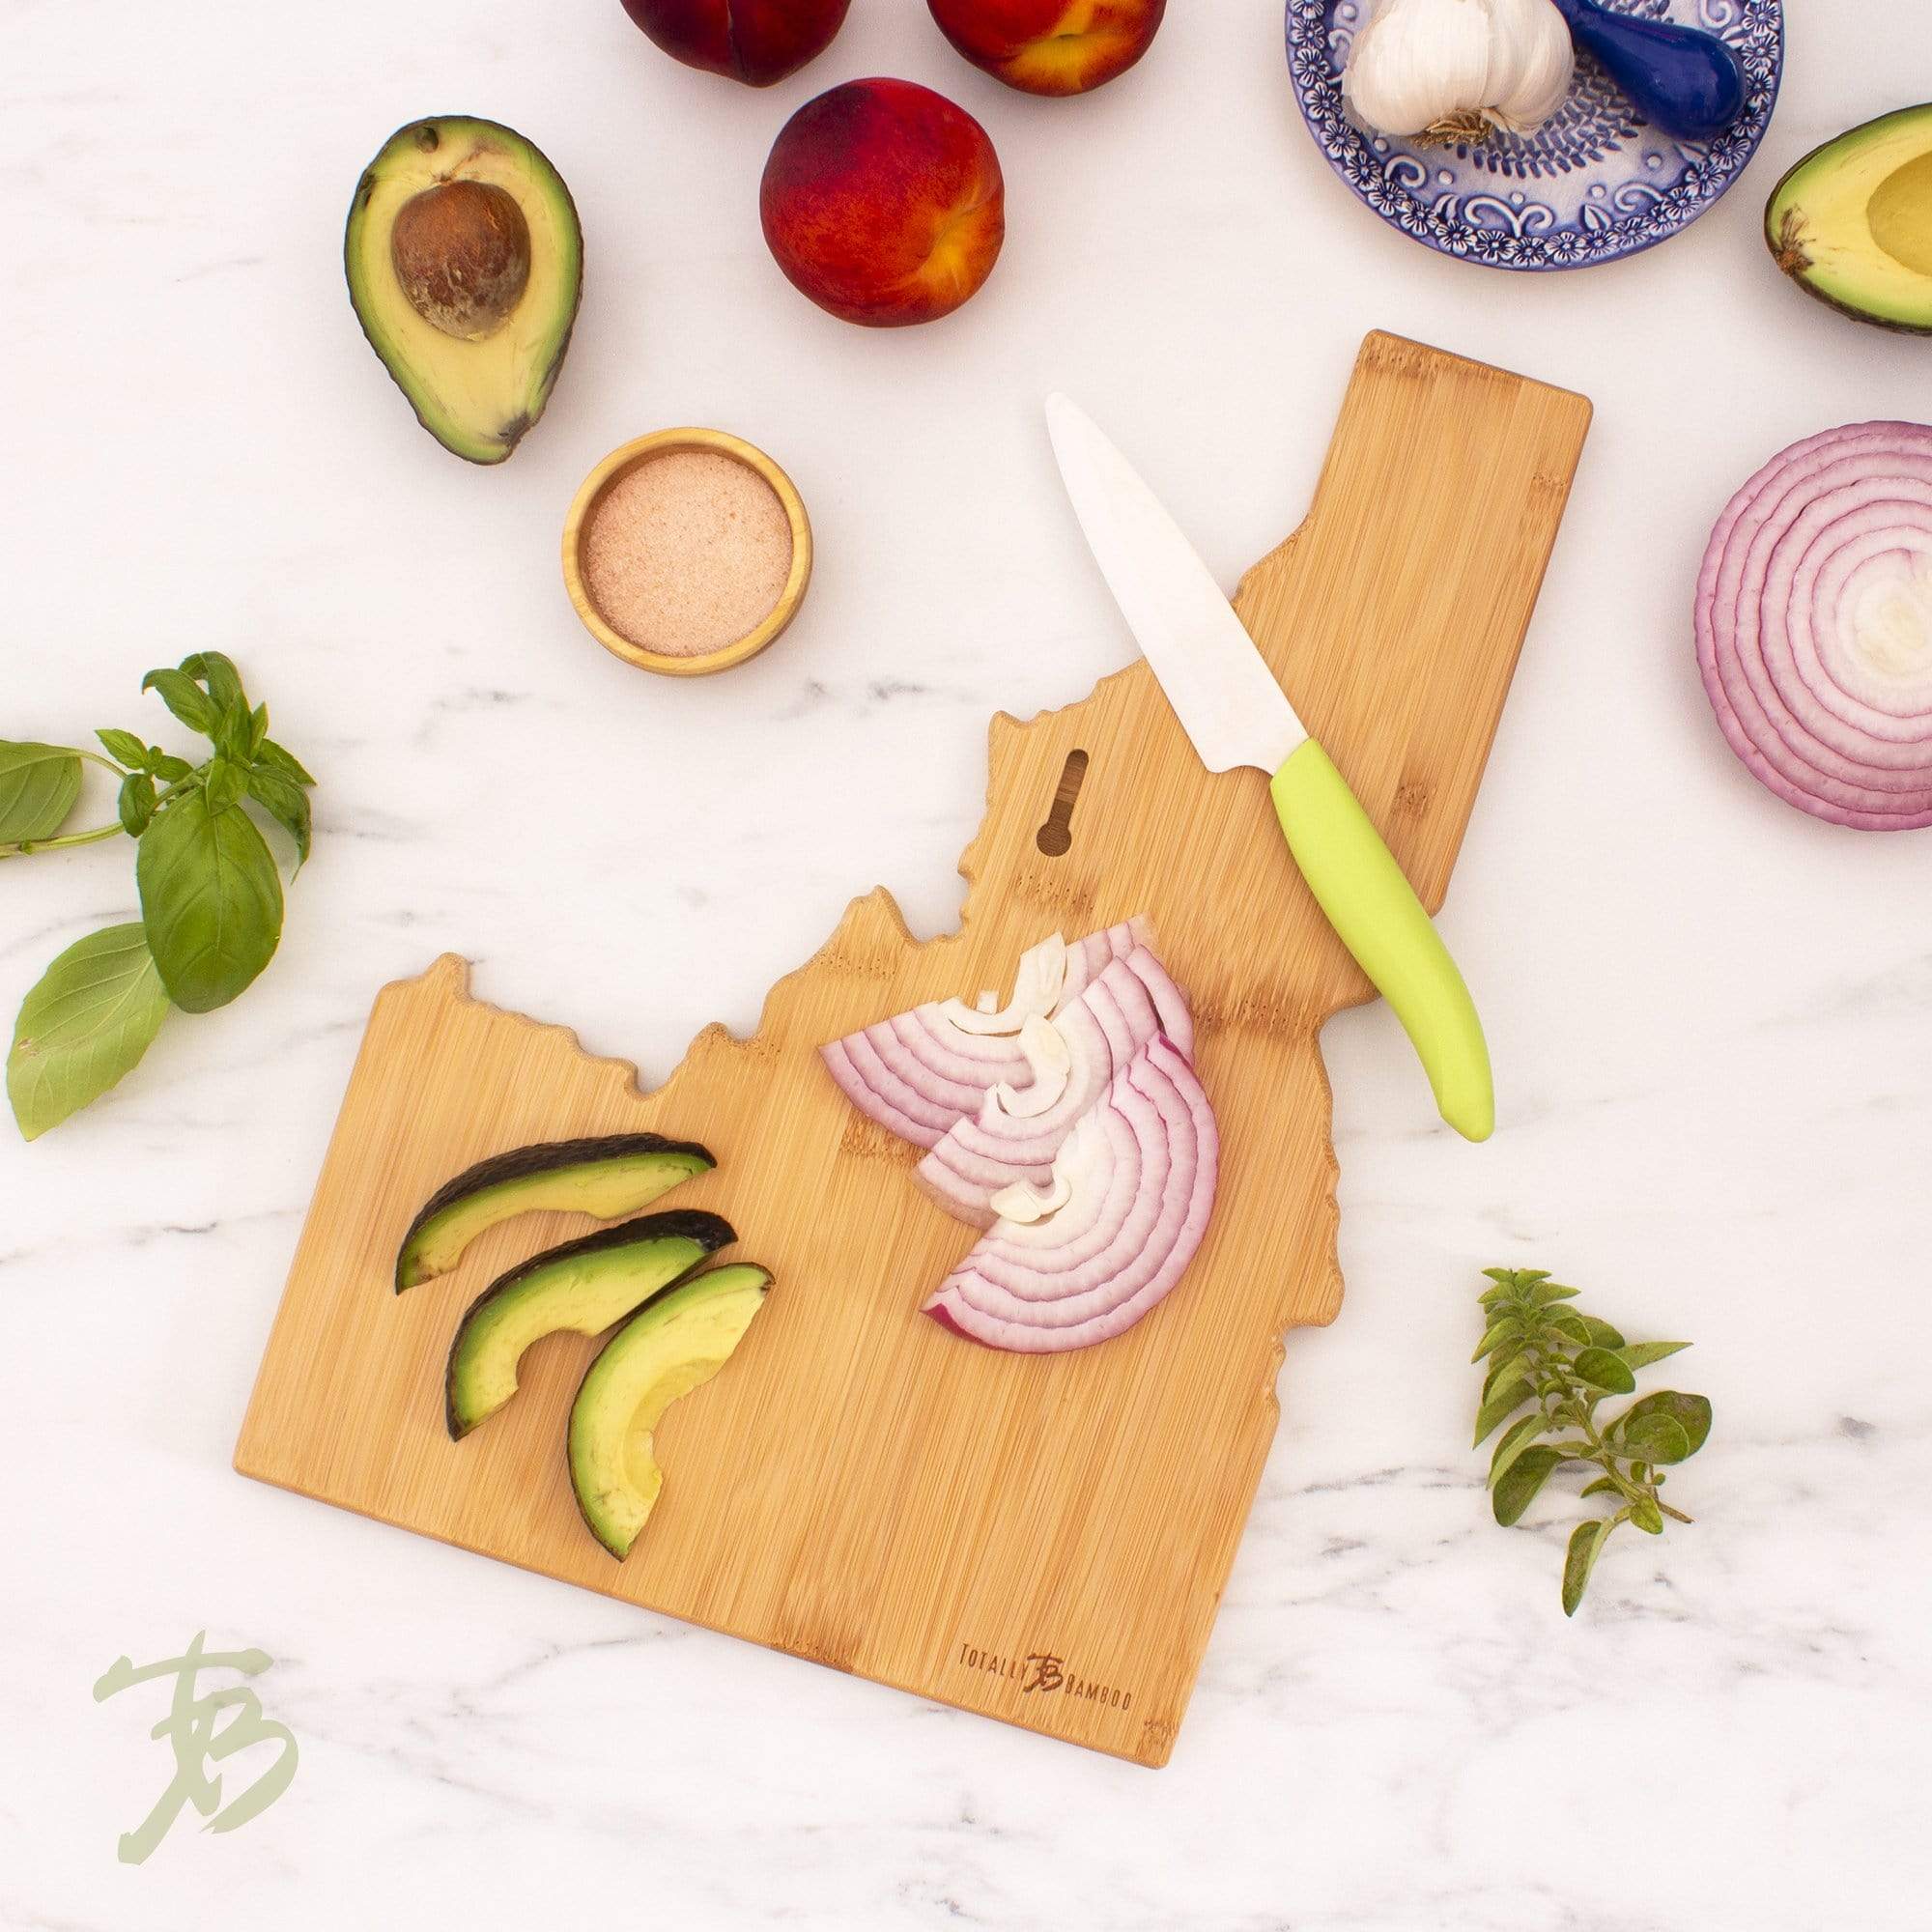 Totally Bamboo Destination Idaho State Shaped Bamboo Serving and Cutting Board